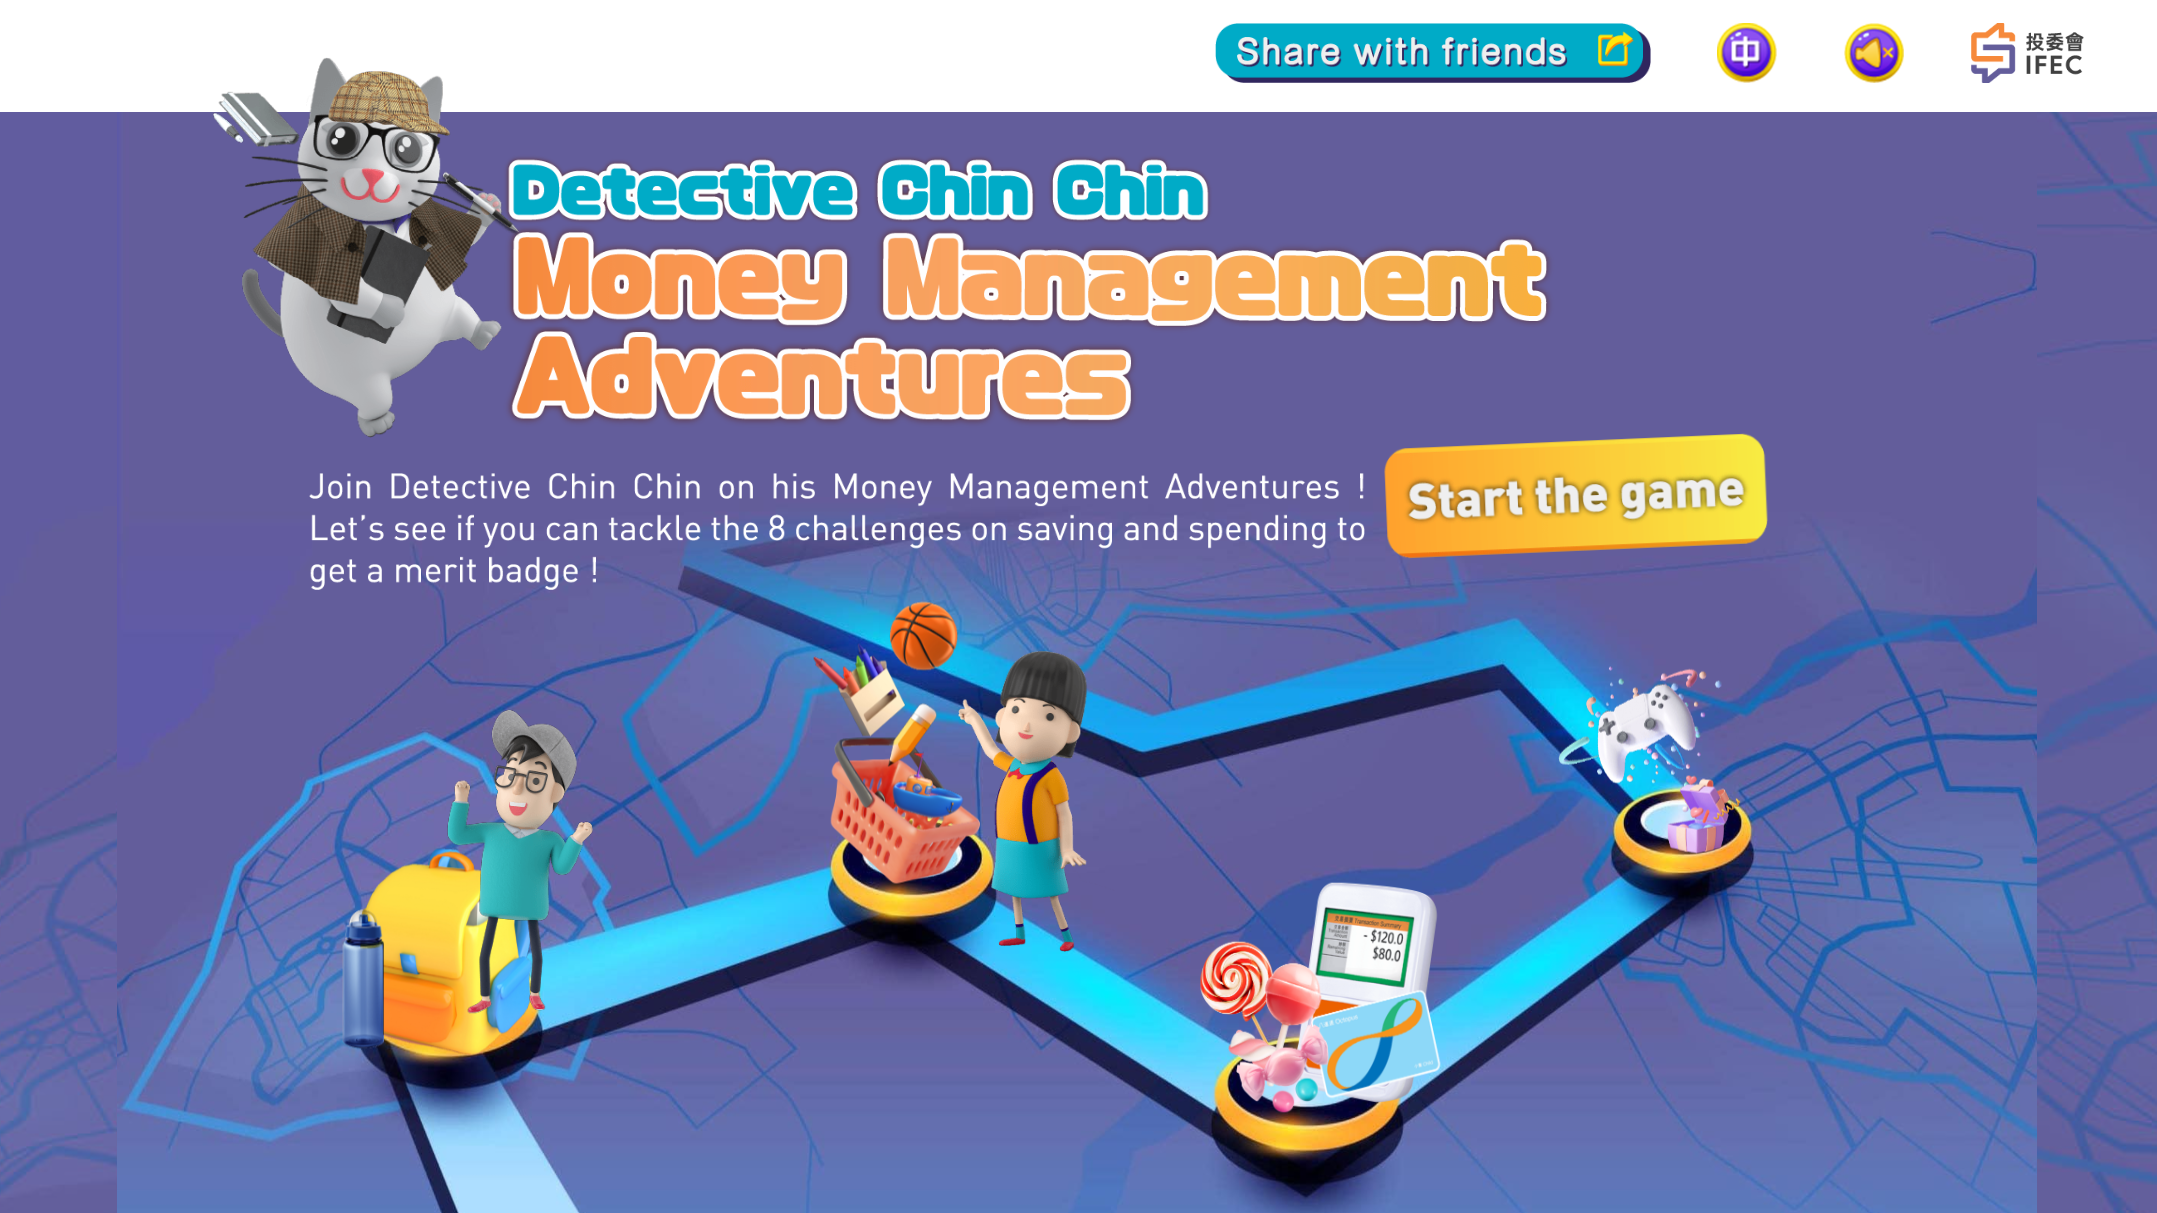 Detective Chin Chin Money Management Adventures (9-11 years old)